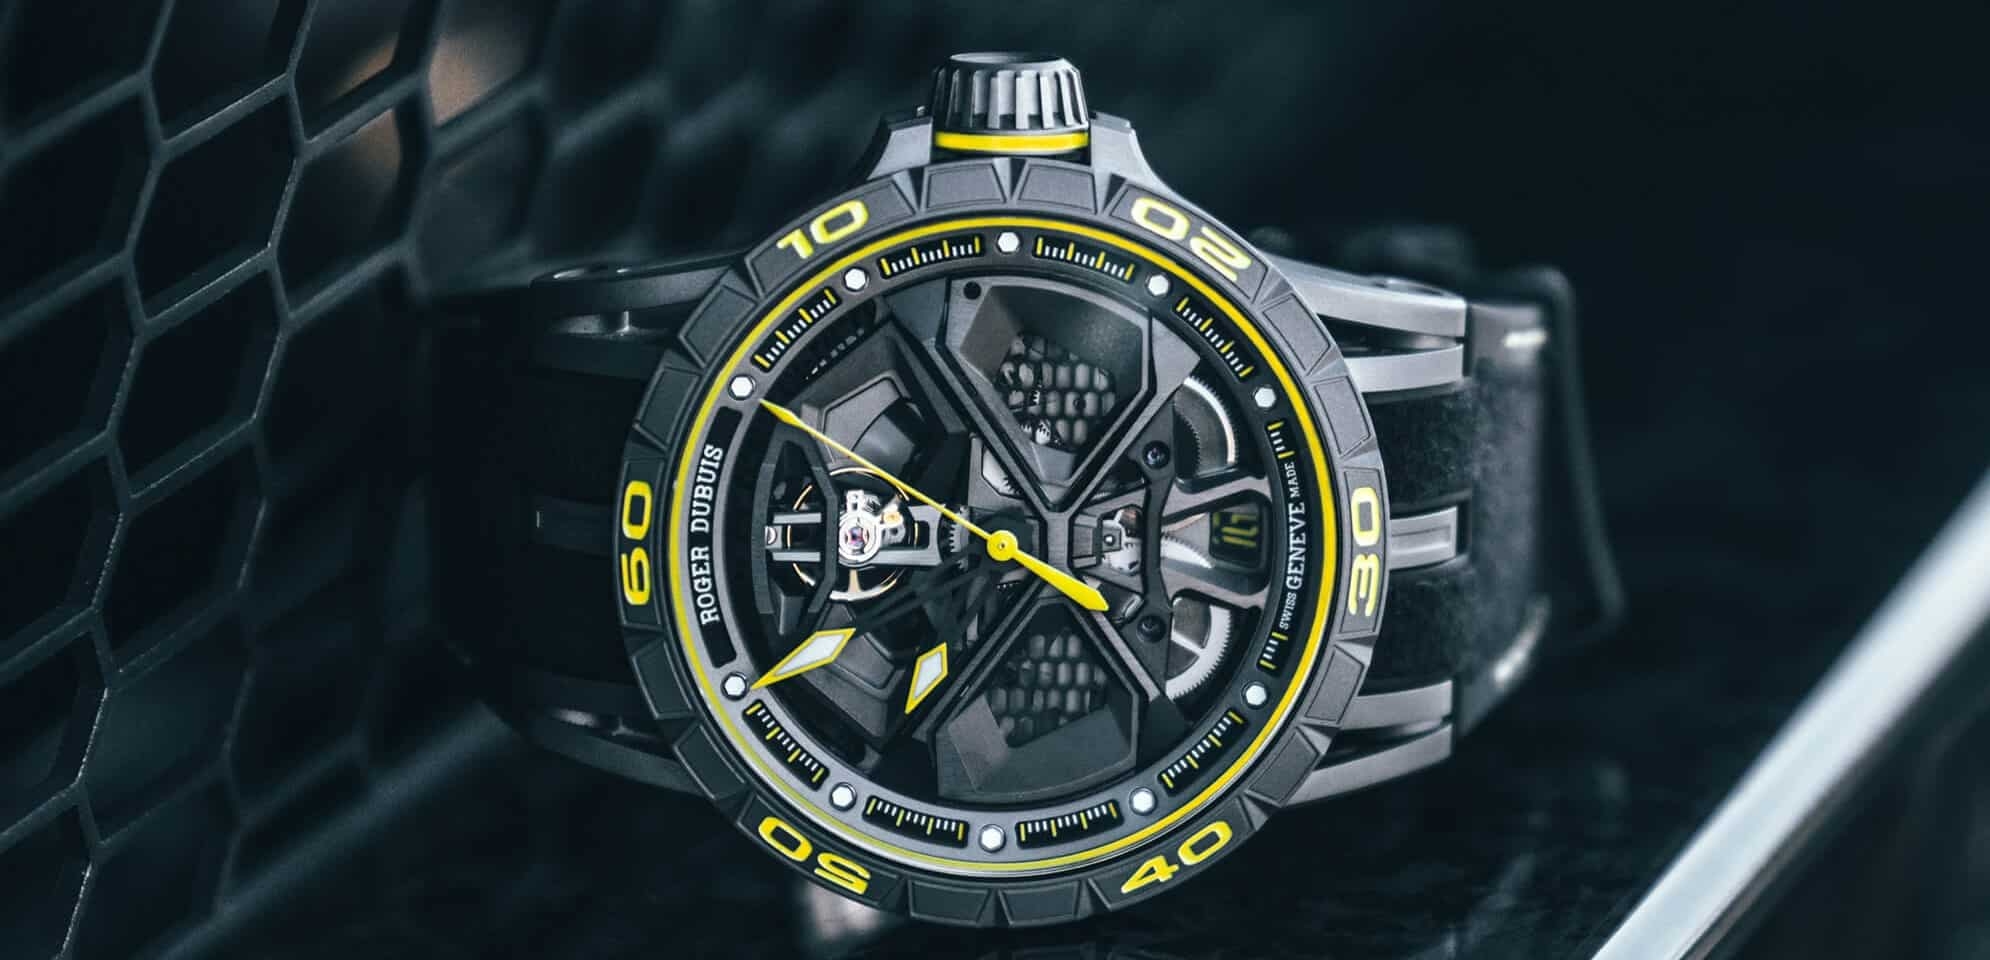 They see me rollin‘, they hatin’: The Roger Dubuis Excalibur Huracán Performante